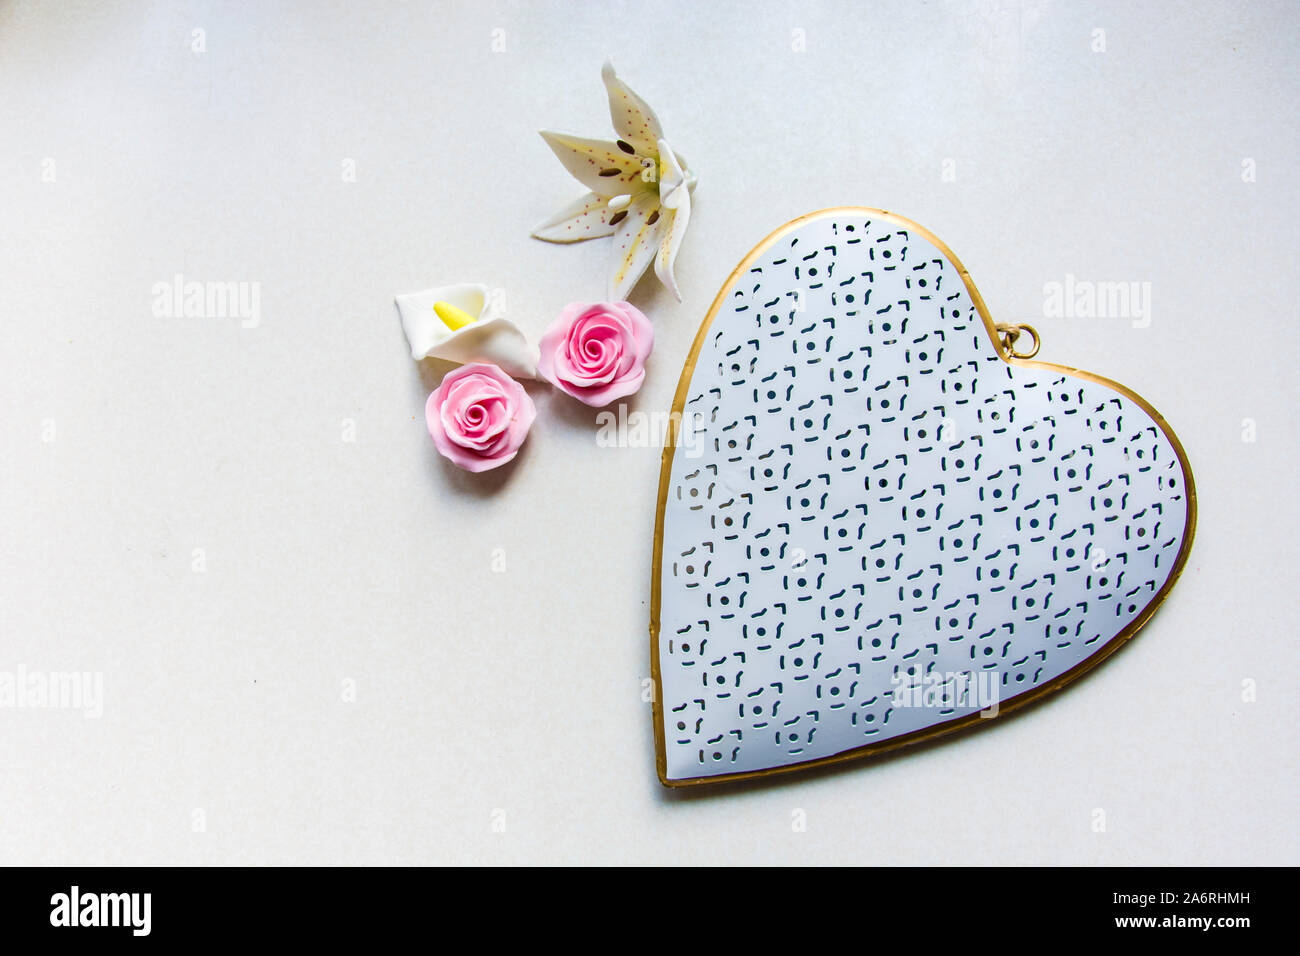 White-gold heart pendant and flowers with sugar on the background Stock Photo